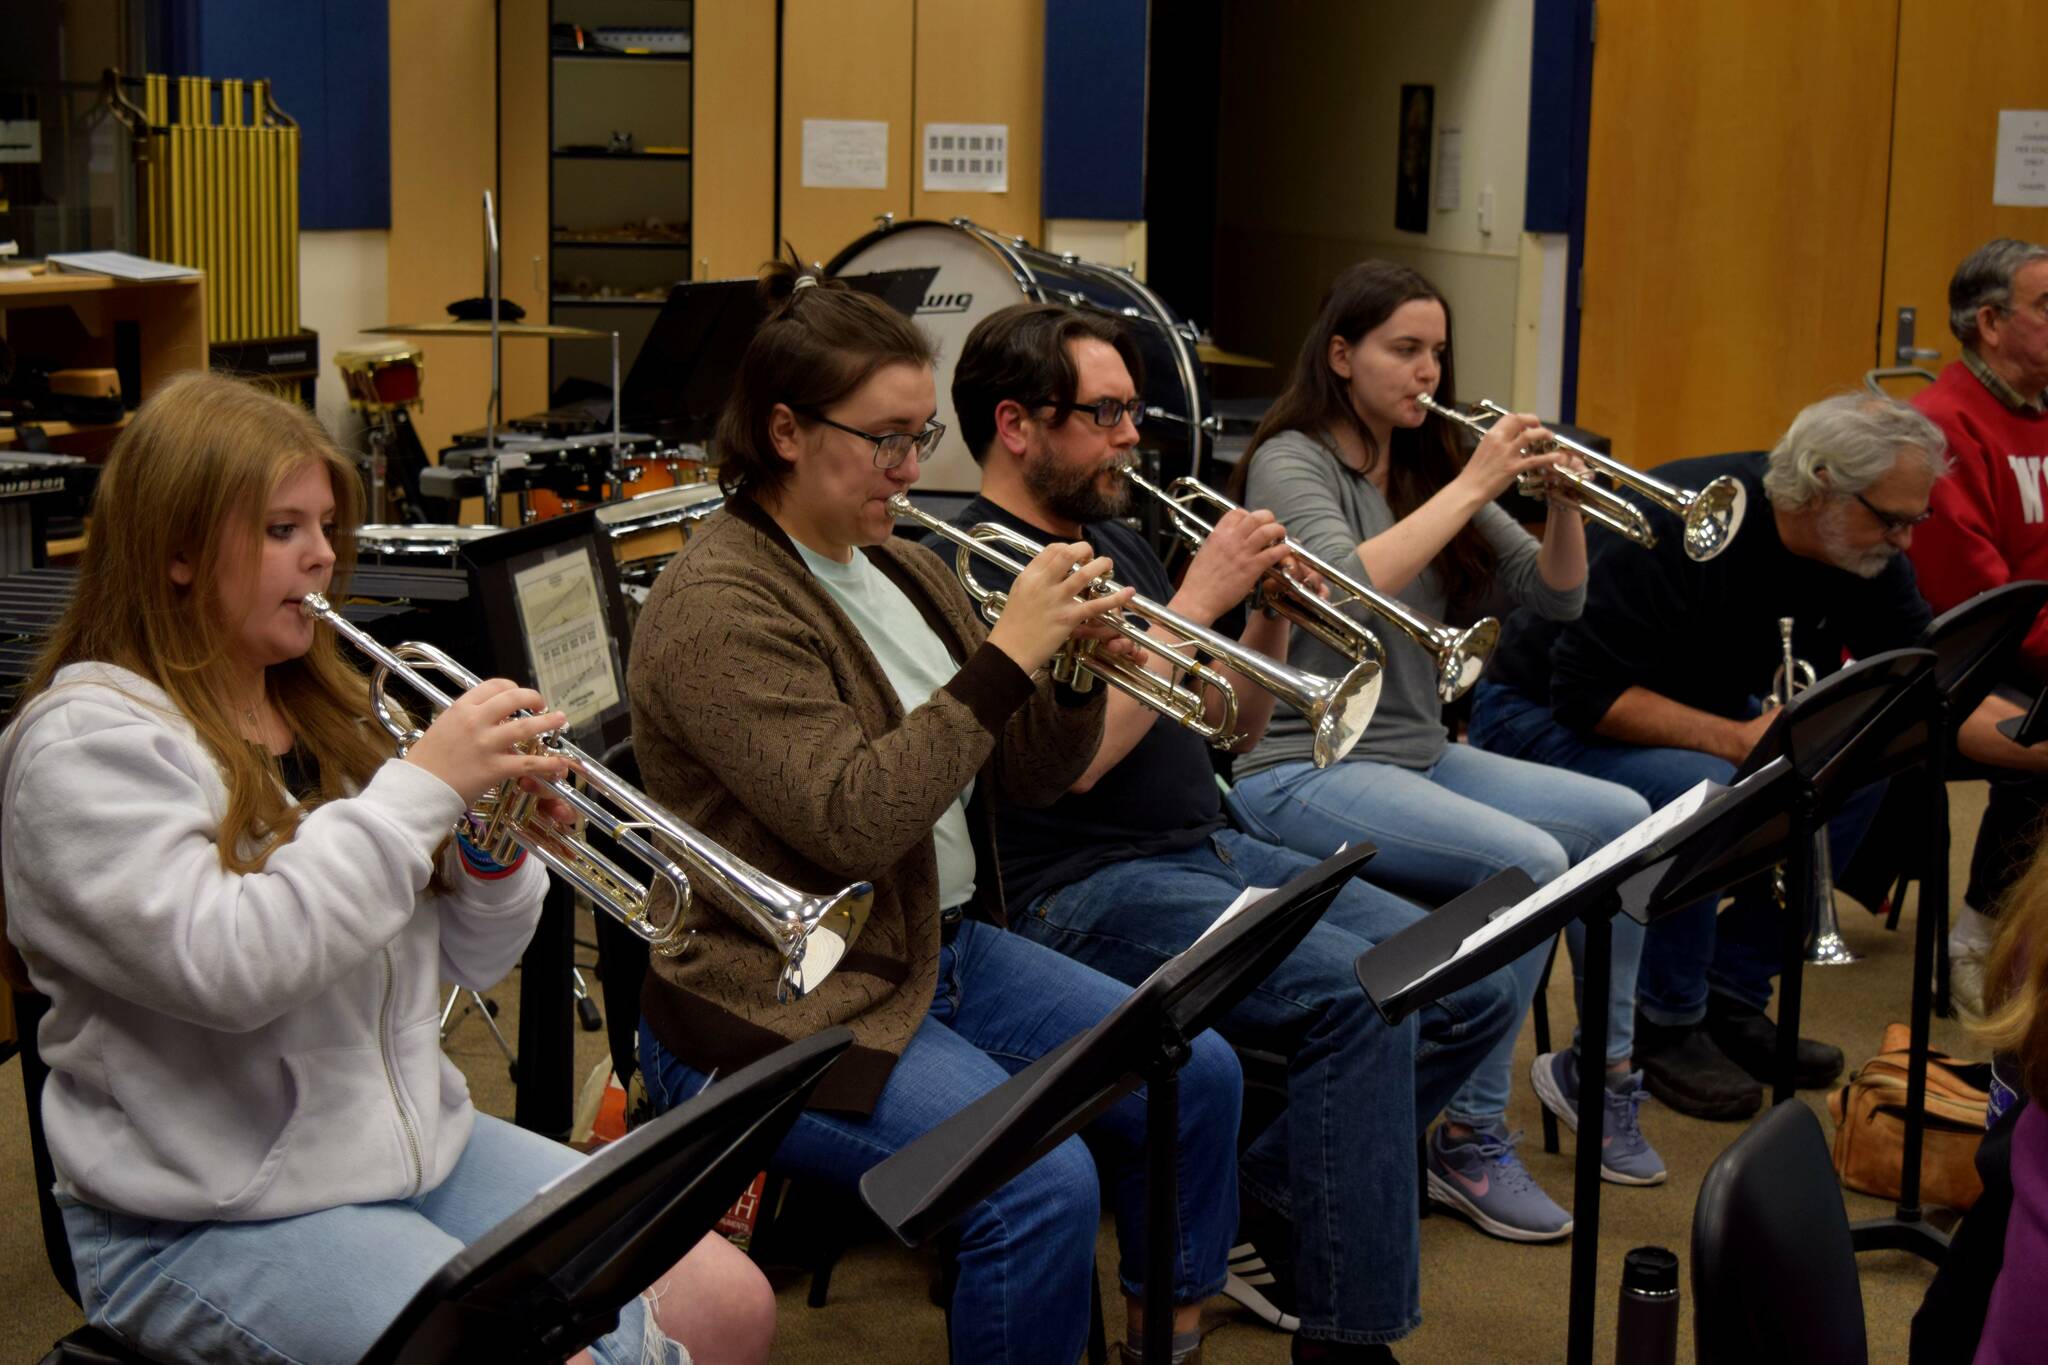 Photo by Conor Wilson/Valley Record.
Trumpet players at the SnoValley Winds rehearsal.